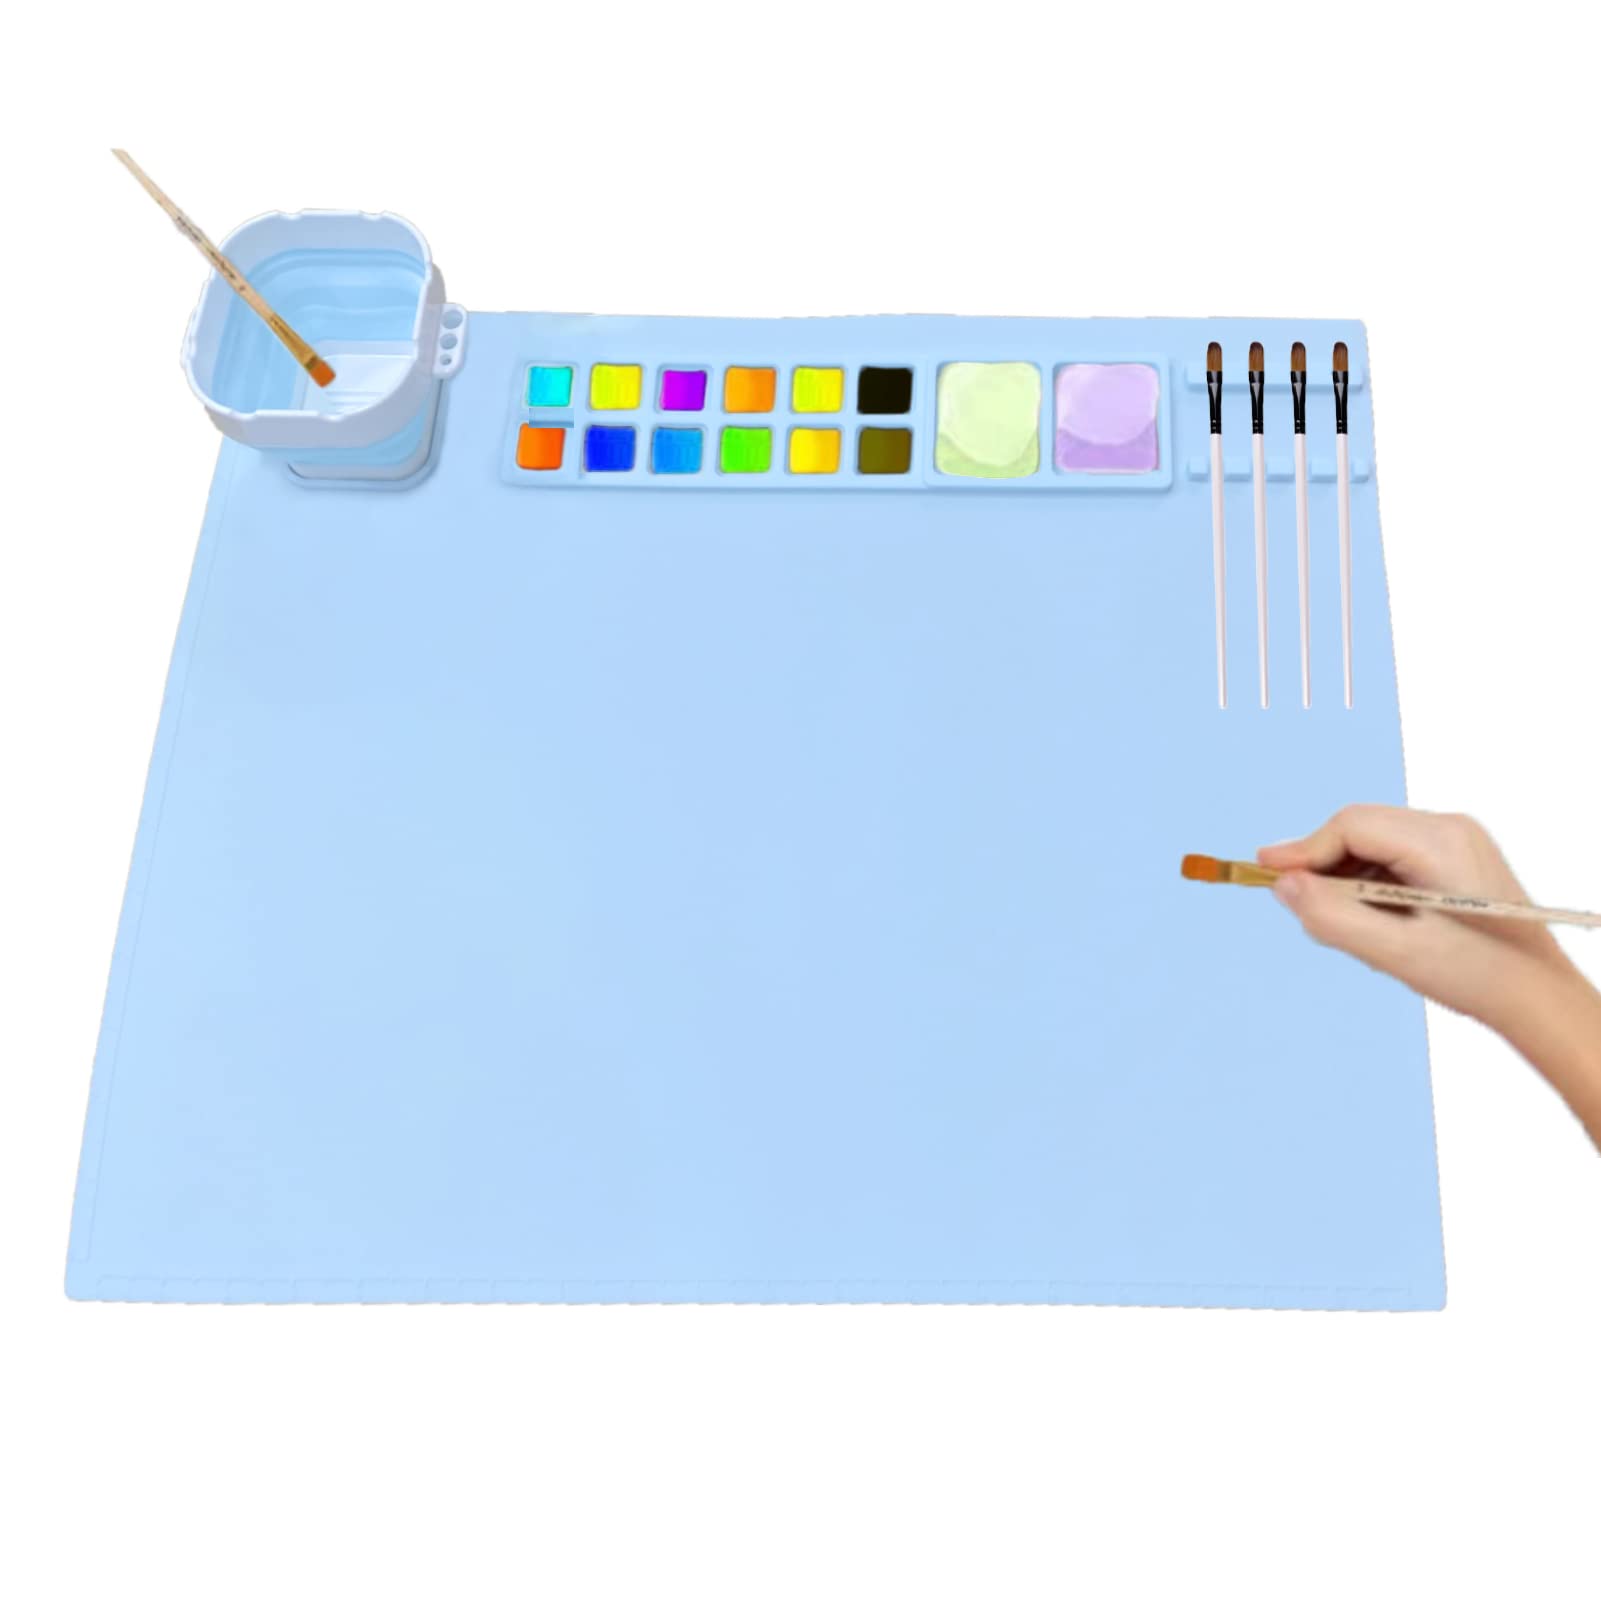 Silicone Craft Mat, Large Mat For Resin Casting, Nonstick Painting